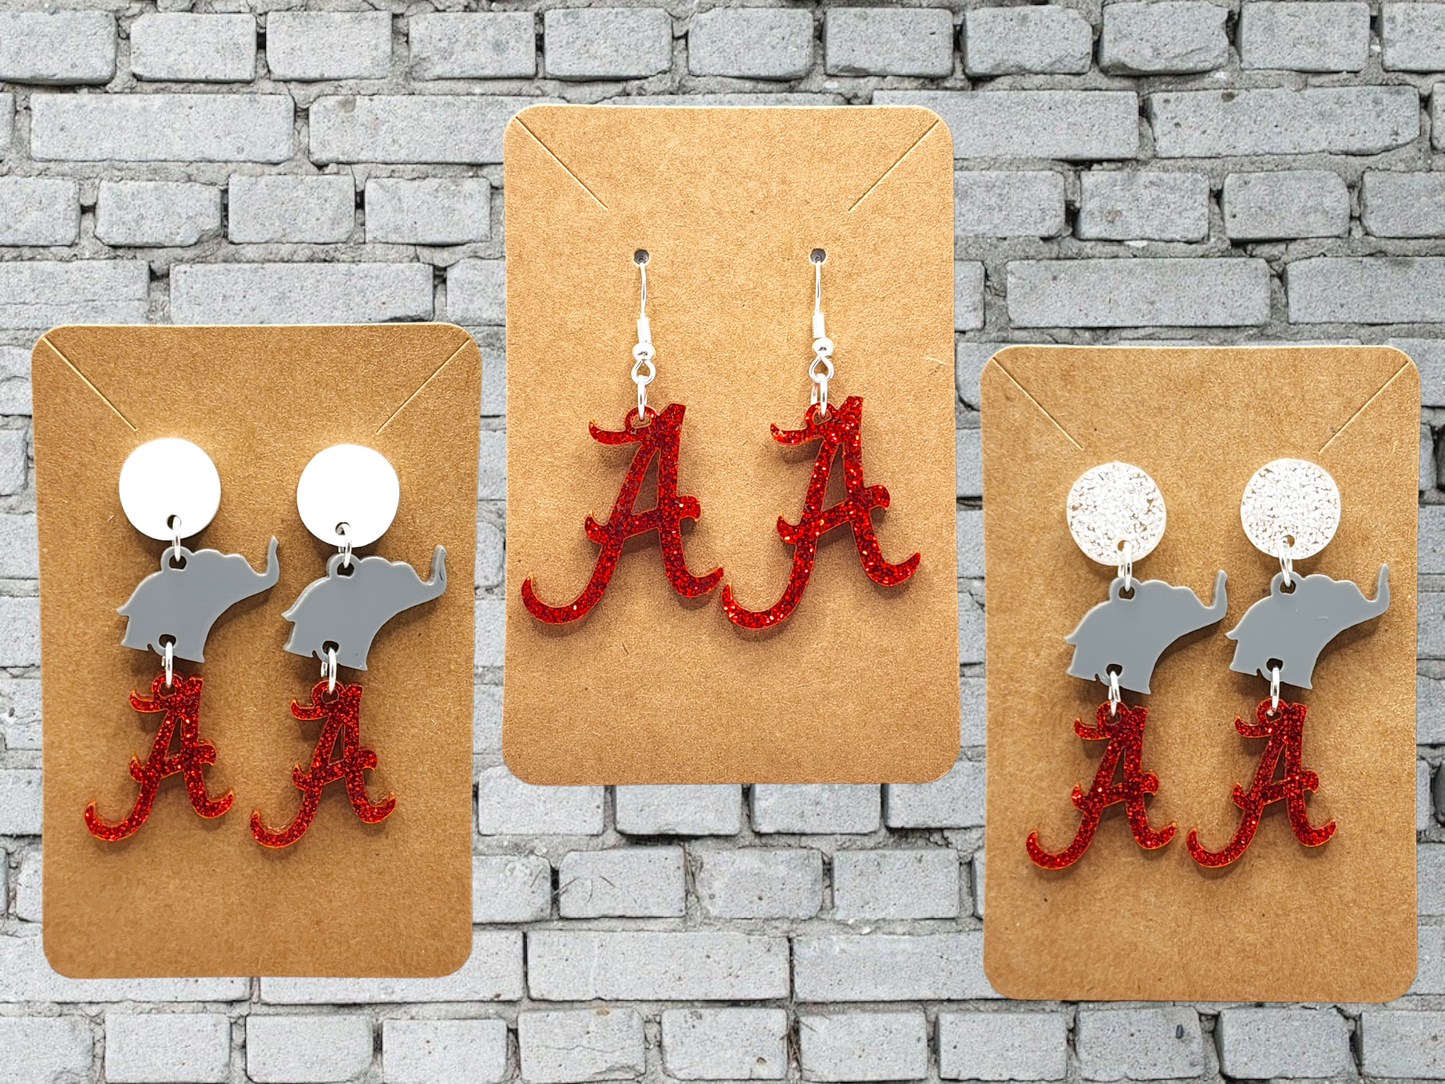 SVG ONLY- ROLLTIDE 3 TIER DANGLES AND BIG A- NOT A PHYSICAL PRODUCT